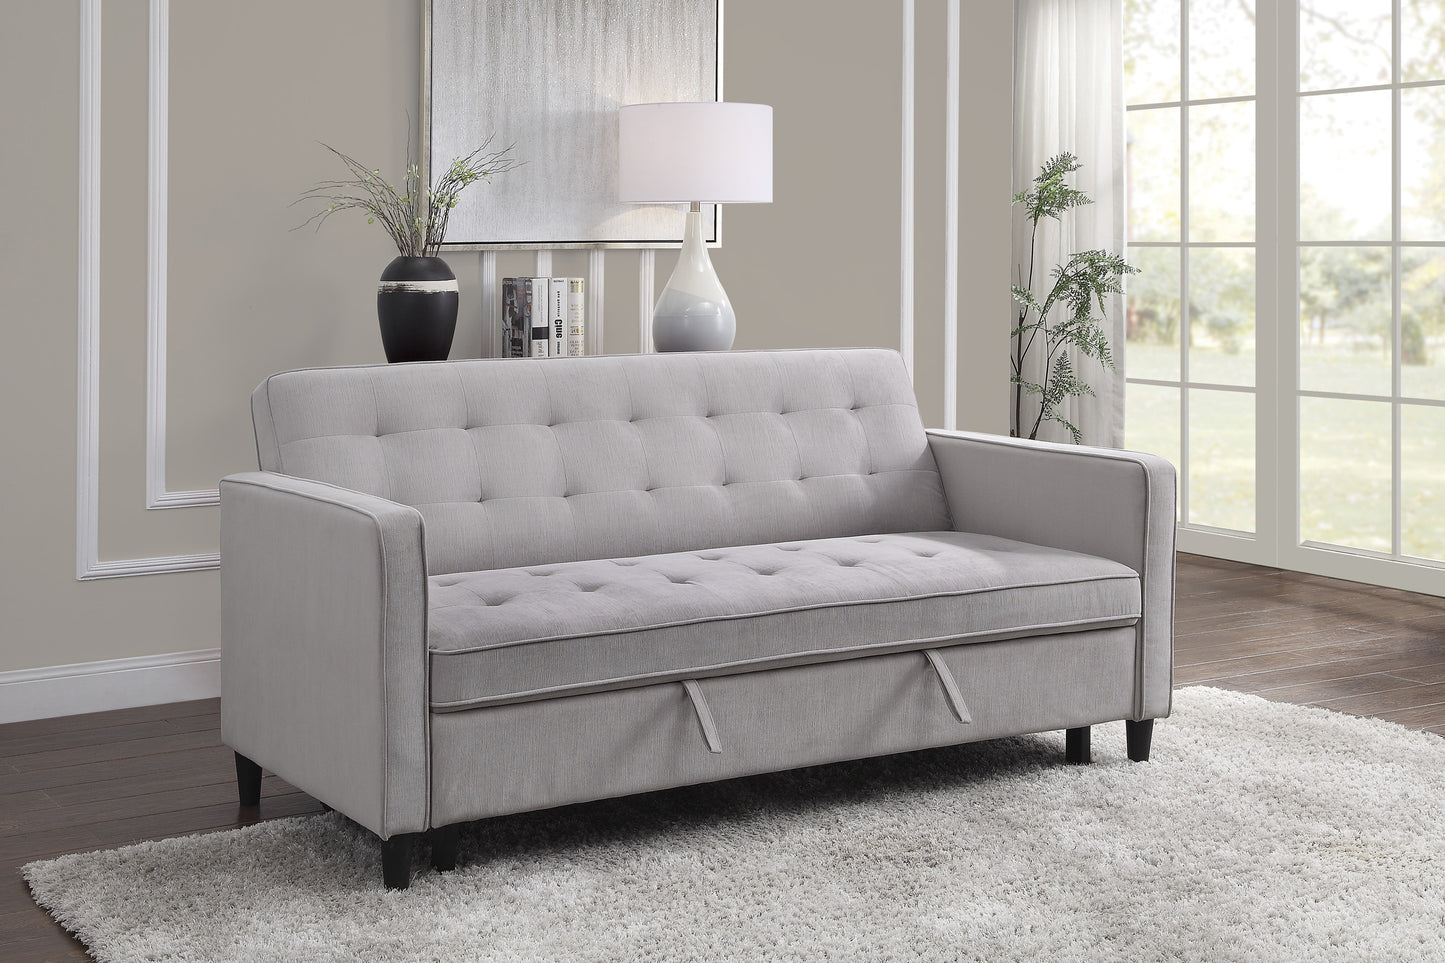 Strader Convertible Studio Sofa with Pull-out Bed DOVE GREY CLEARANCE LIMITED